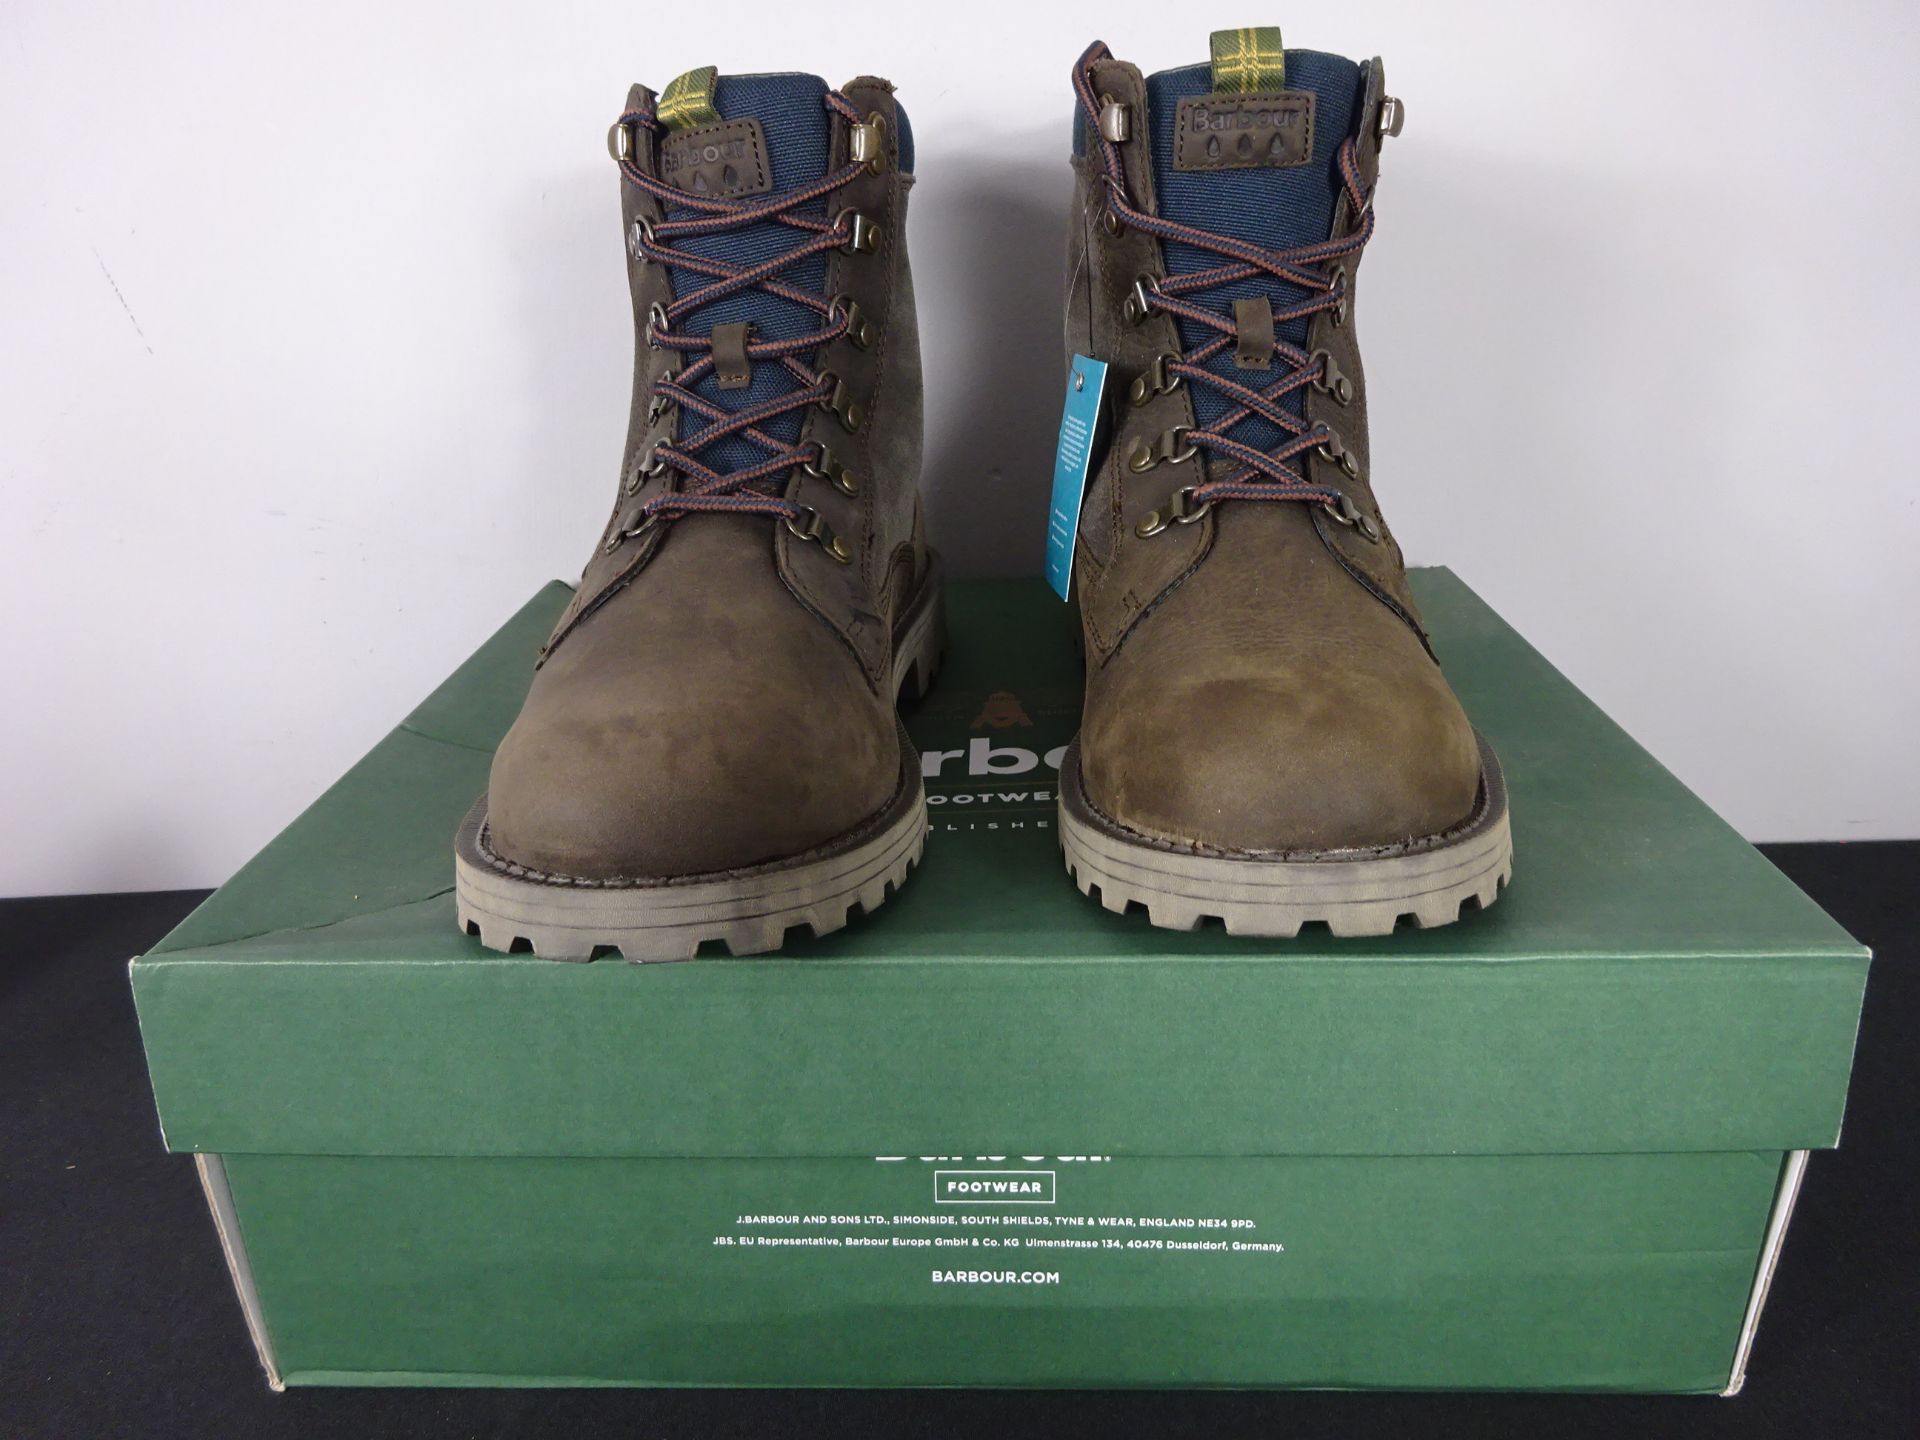 RRP £129.99 - New Barbour Chiltern Boots - Size 12. - Image 2 of 3